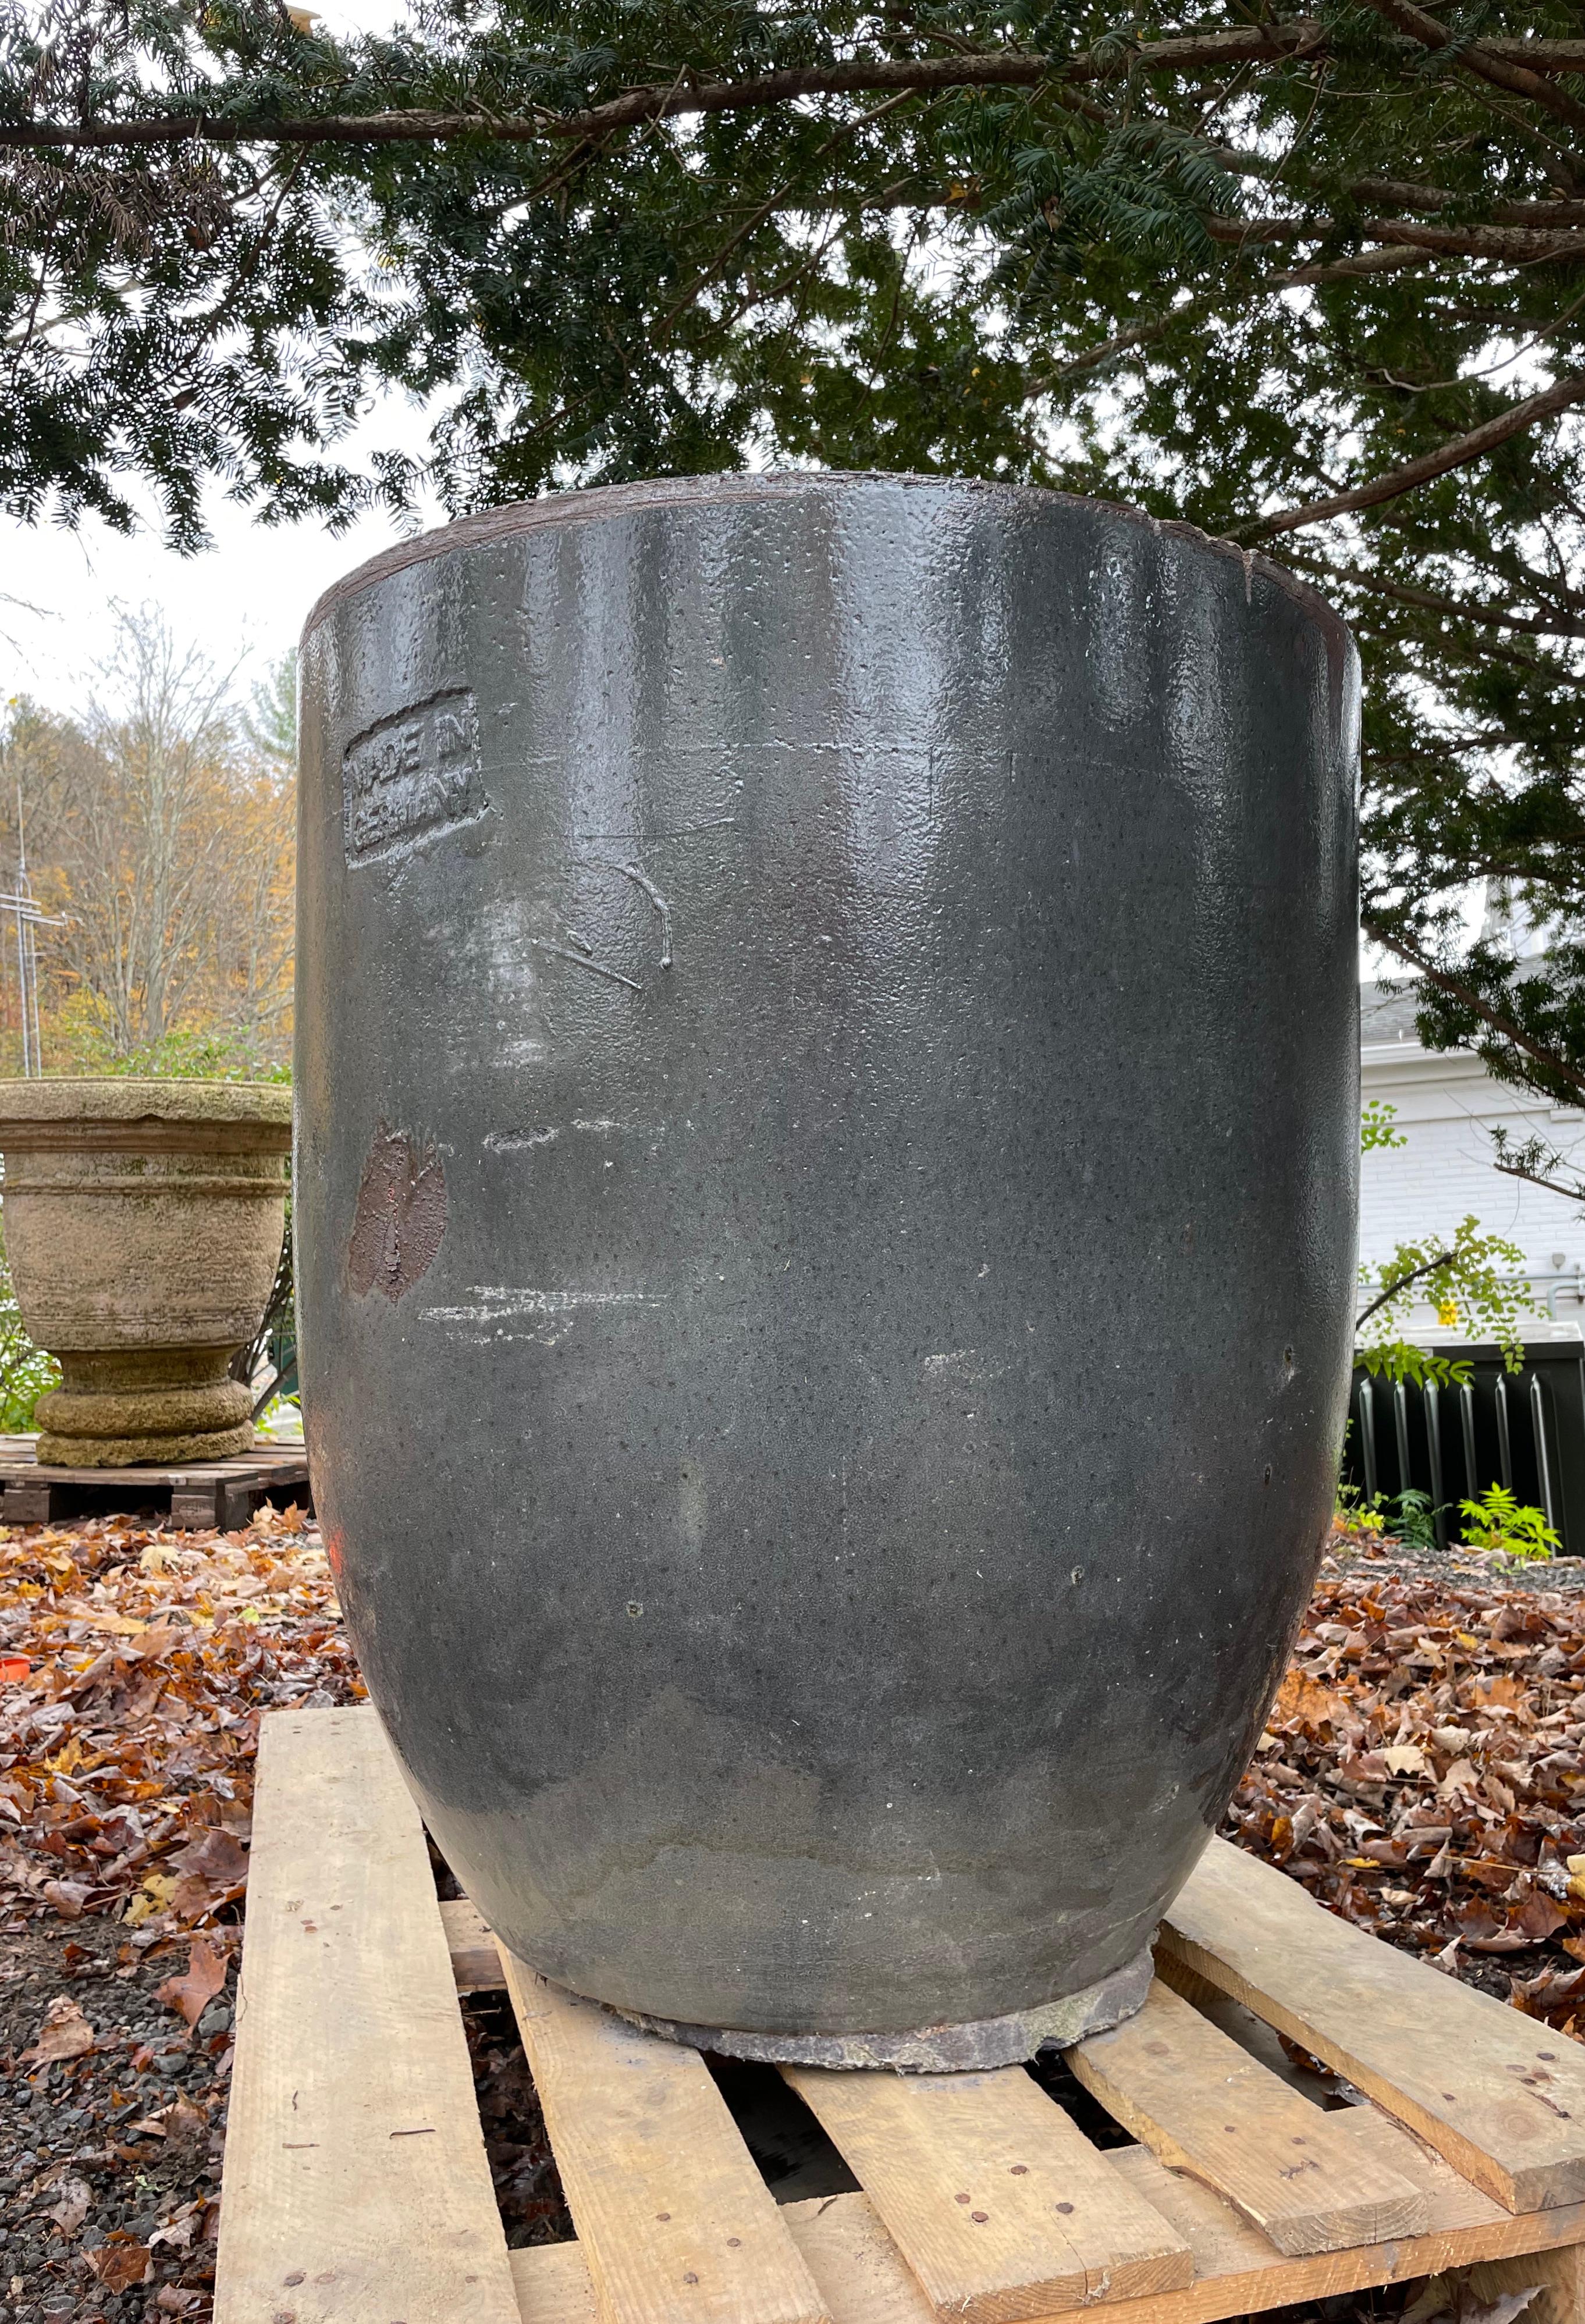 Crucibles have been used throughout history to smelt metal and other substances, but the ceramic ones make outstanding planters. These grabbed us right away because of their enormous size and stunning sea-green color. Their very large planting wells